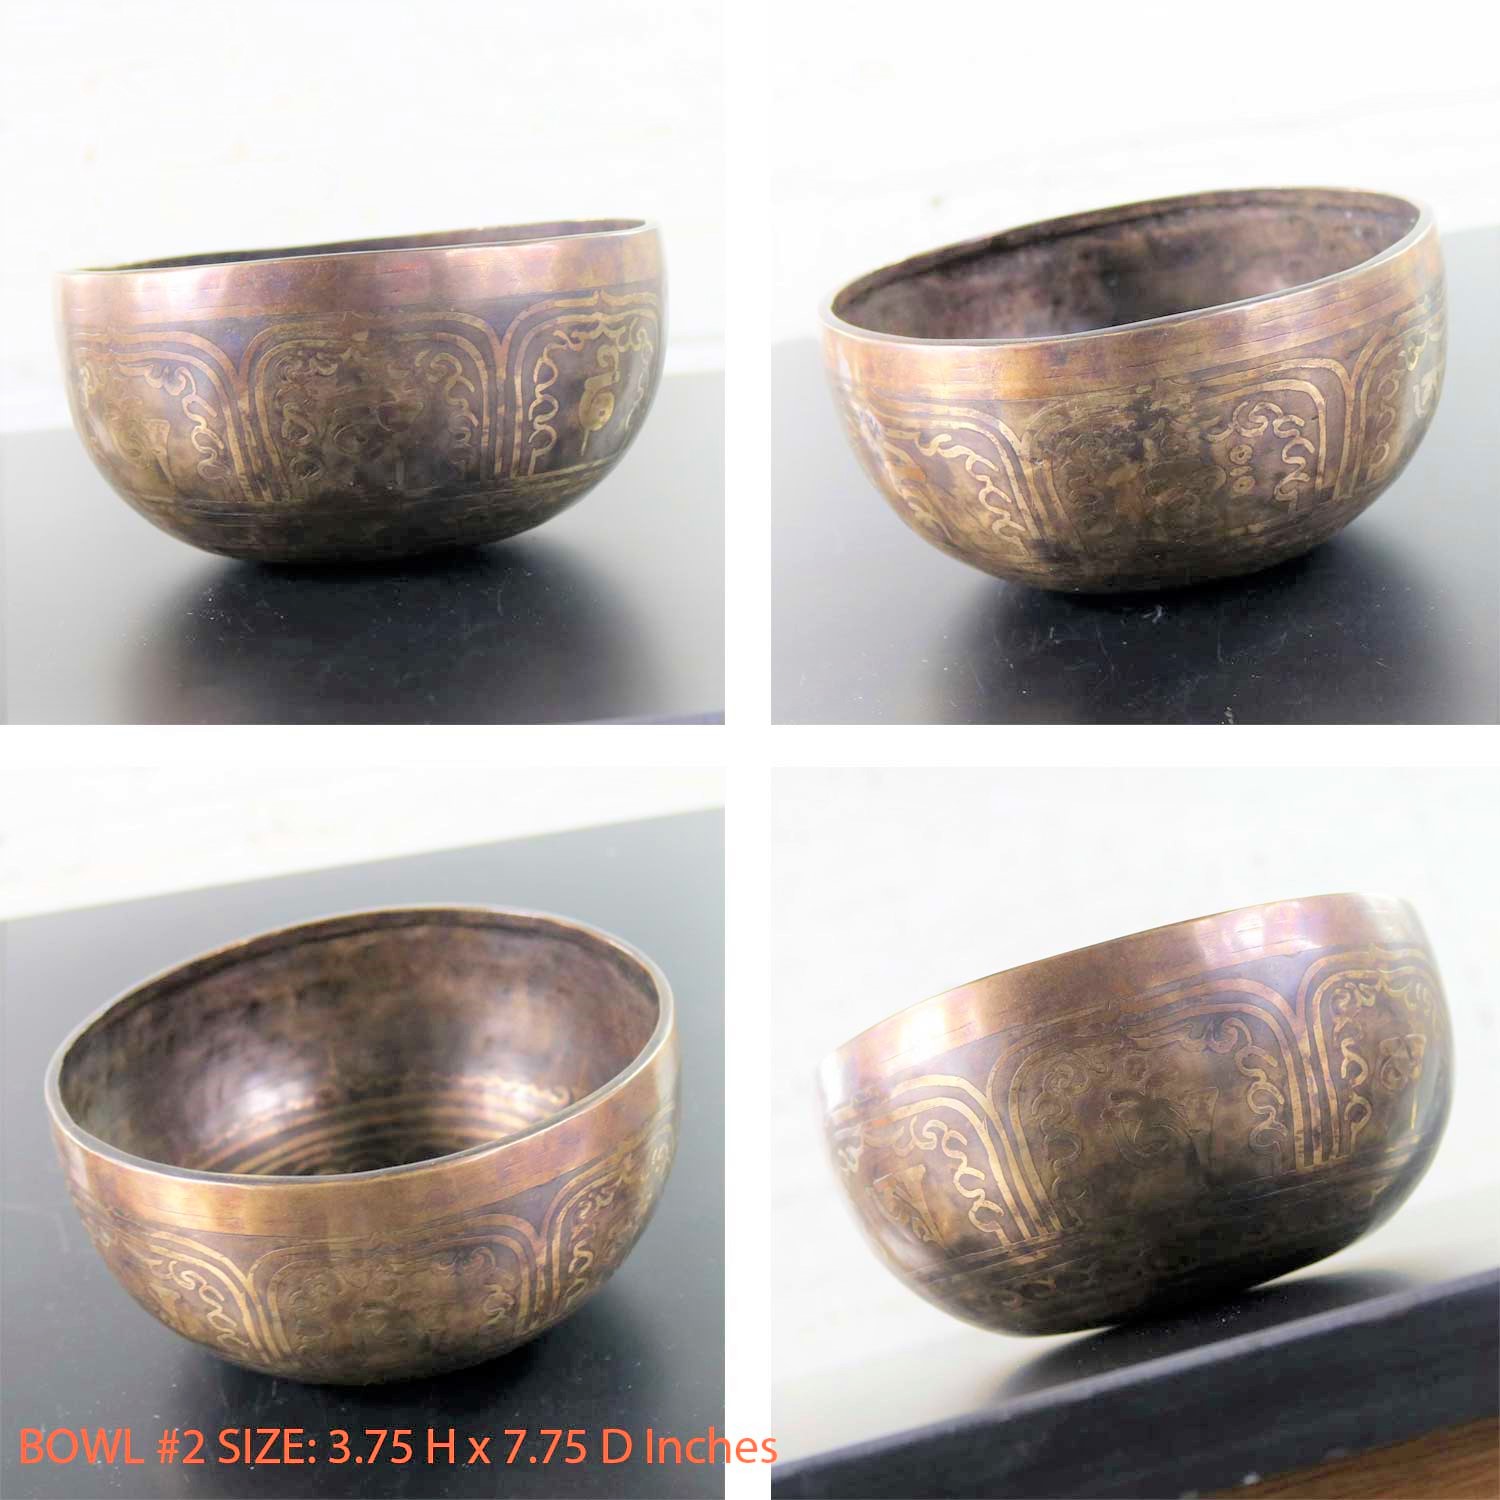 Vintage Set of 6 Bronze Nesting Incised Singing Bowls or Standing Bowls with Mallets